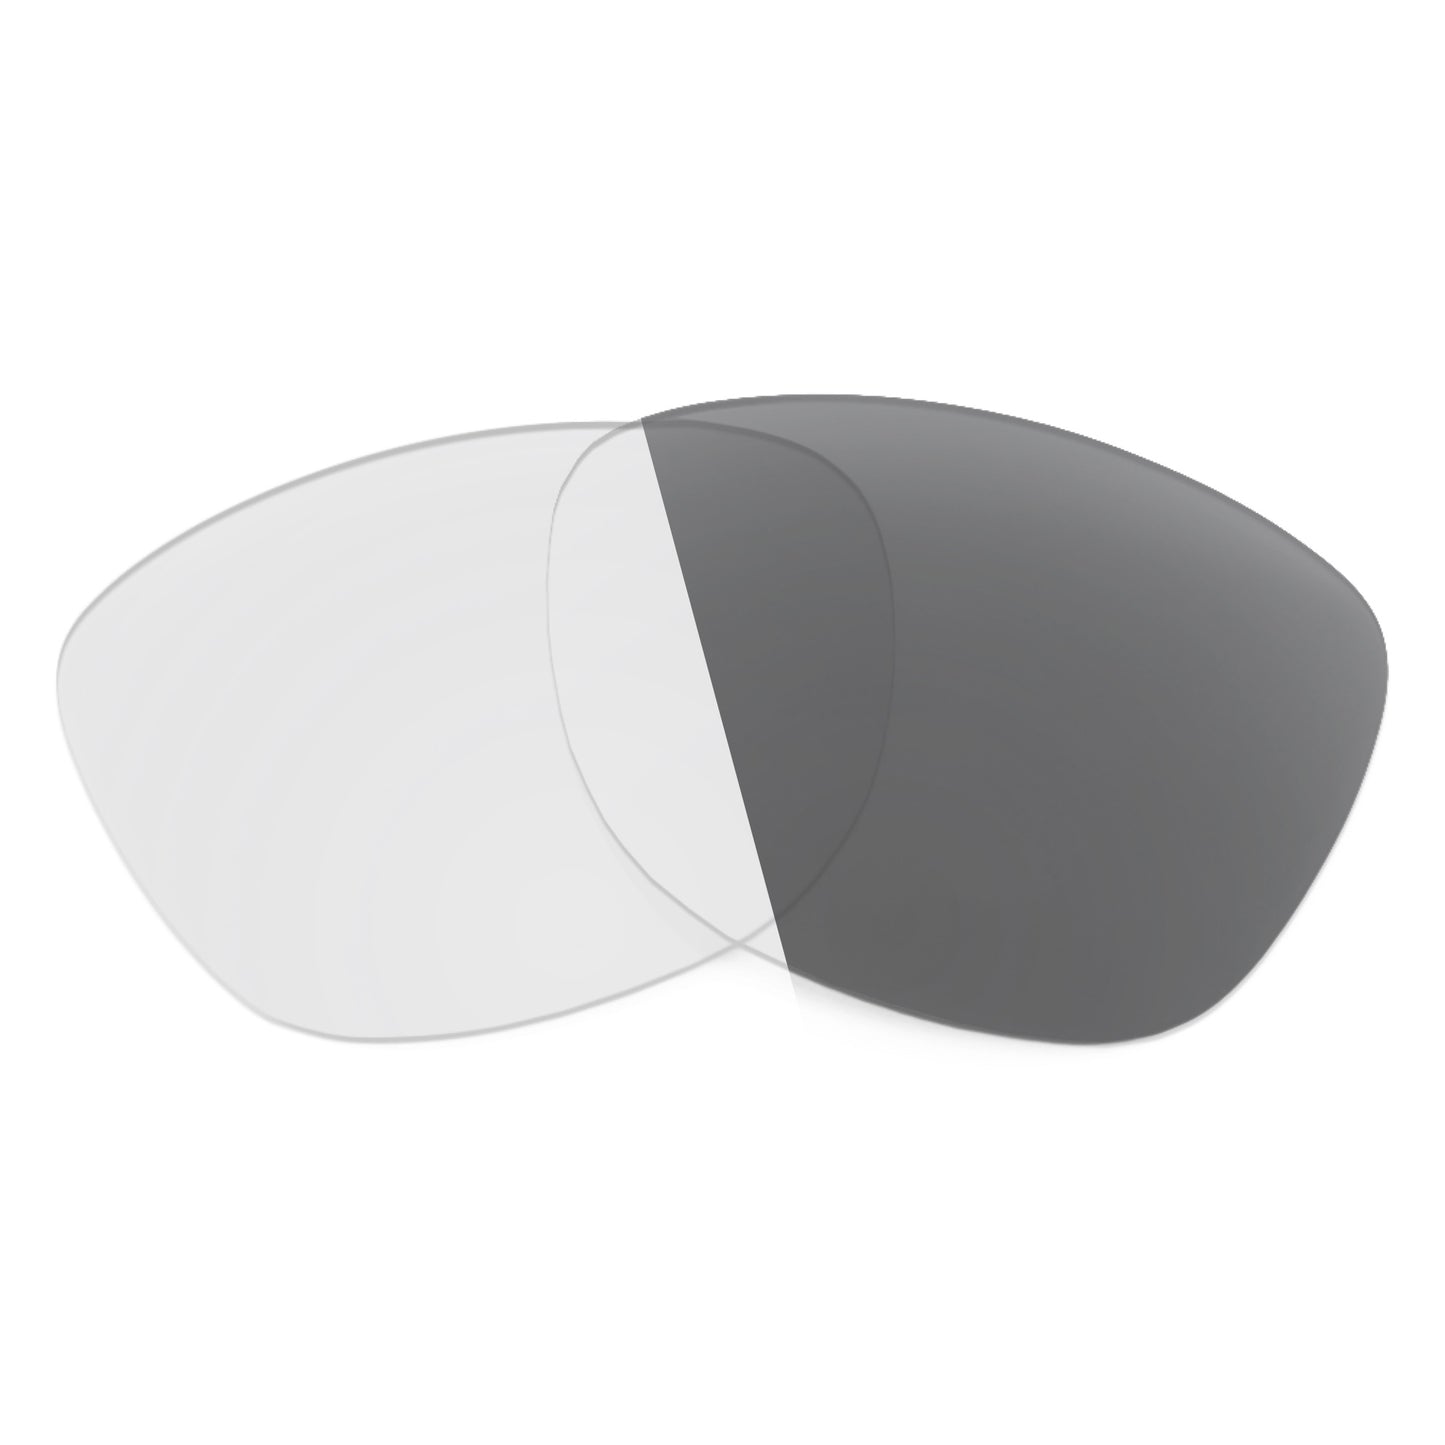 Revant replacement lenses for VonZipper Hotwax Non-Polarized Adapt Gray Photochromic